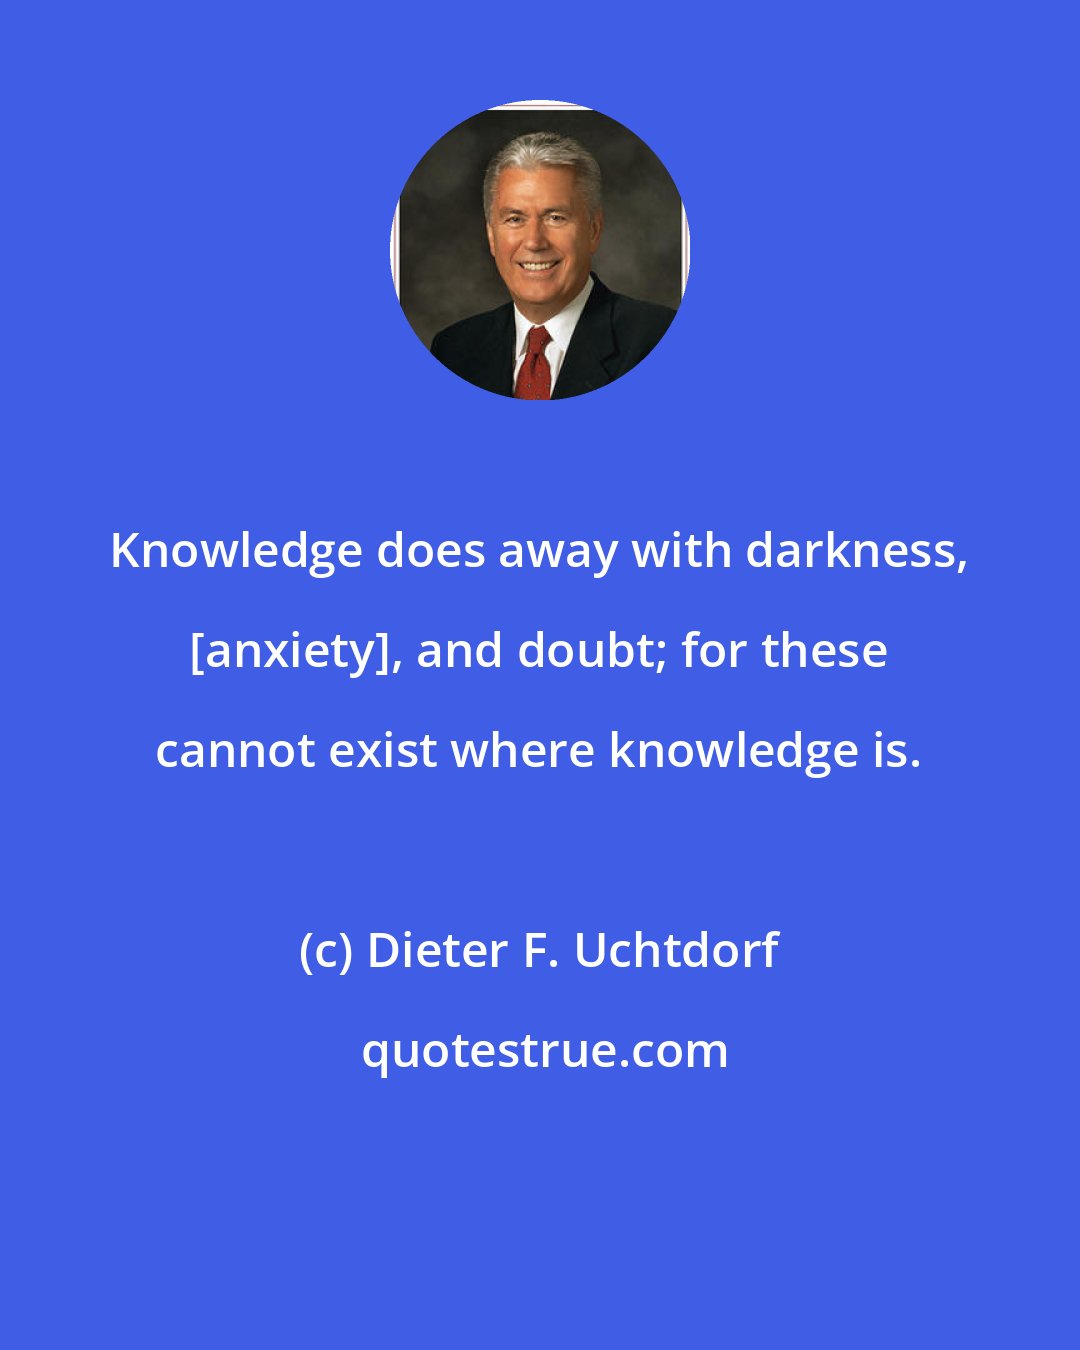 Dieter F. Uchtdorf: Knowledge does away with darkness, [anxiety], and doubt; for these cannot exist where knowledge is.